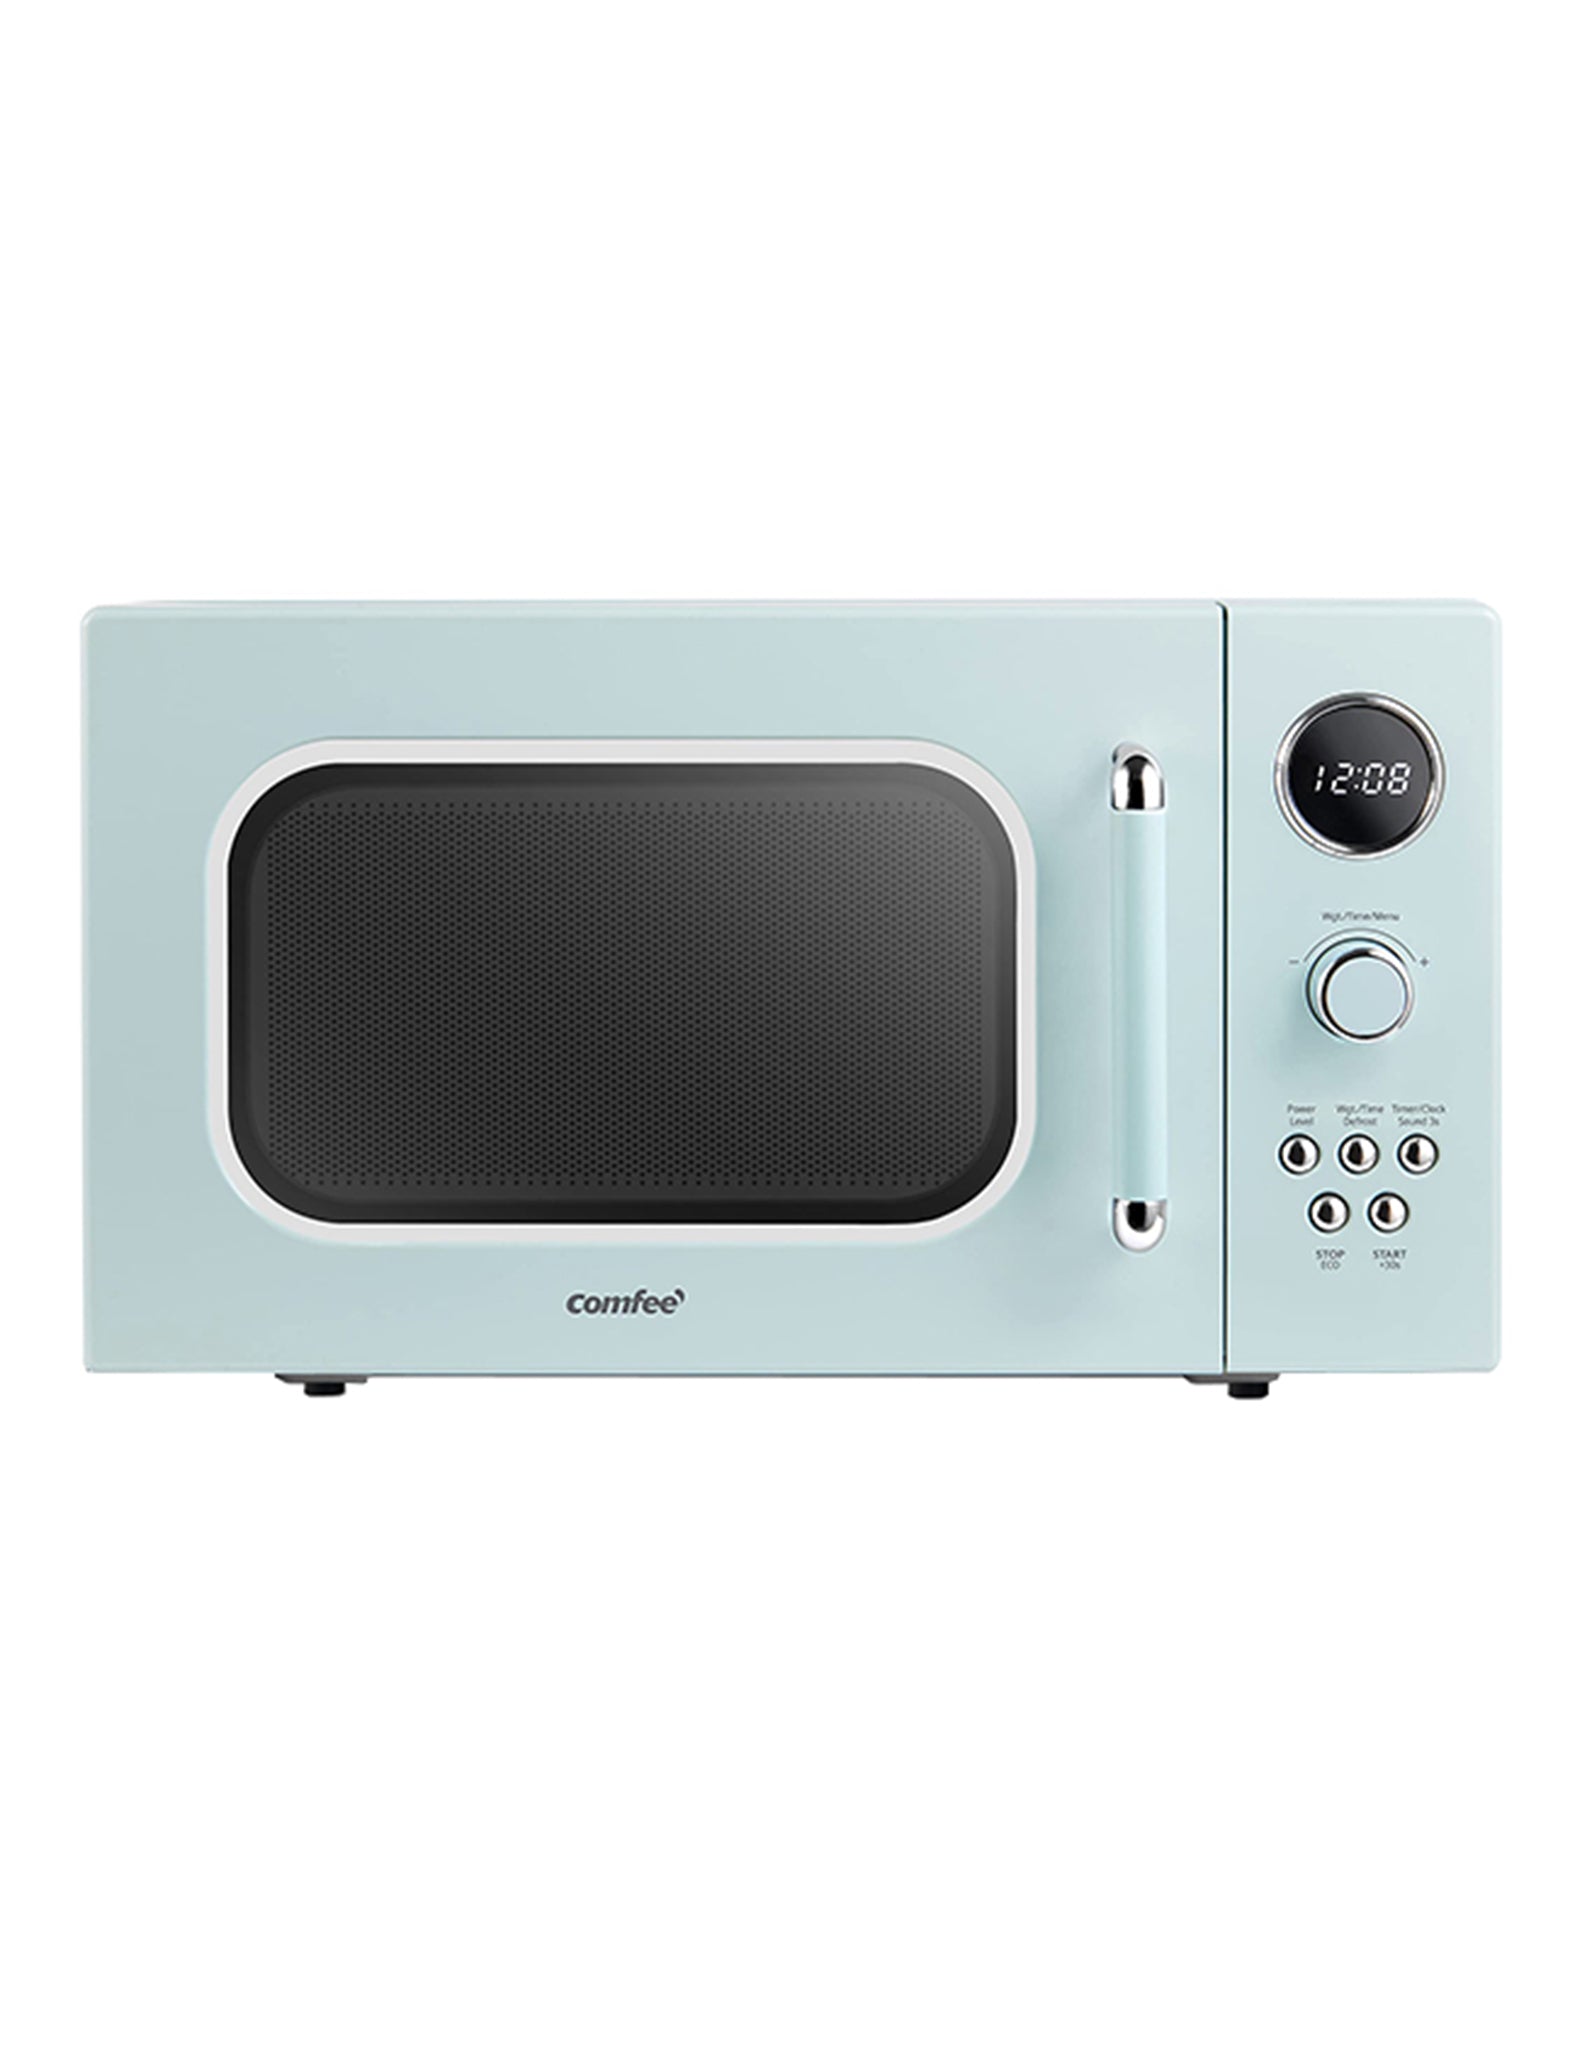 COMFEE' Retro Small Microwave Oven With Compact Size, 9 Preset Menus,  Position-Memory Turntable, Mute Function, Countertop Perfect For Spaces,  0.7 Cu